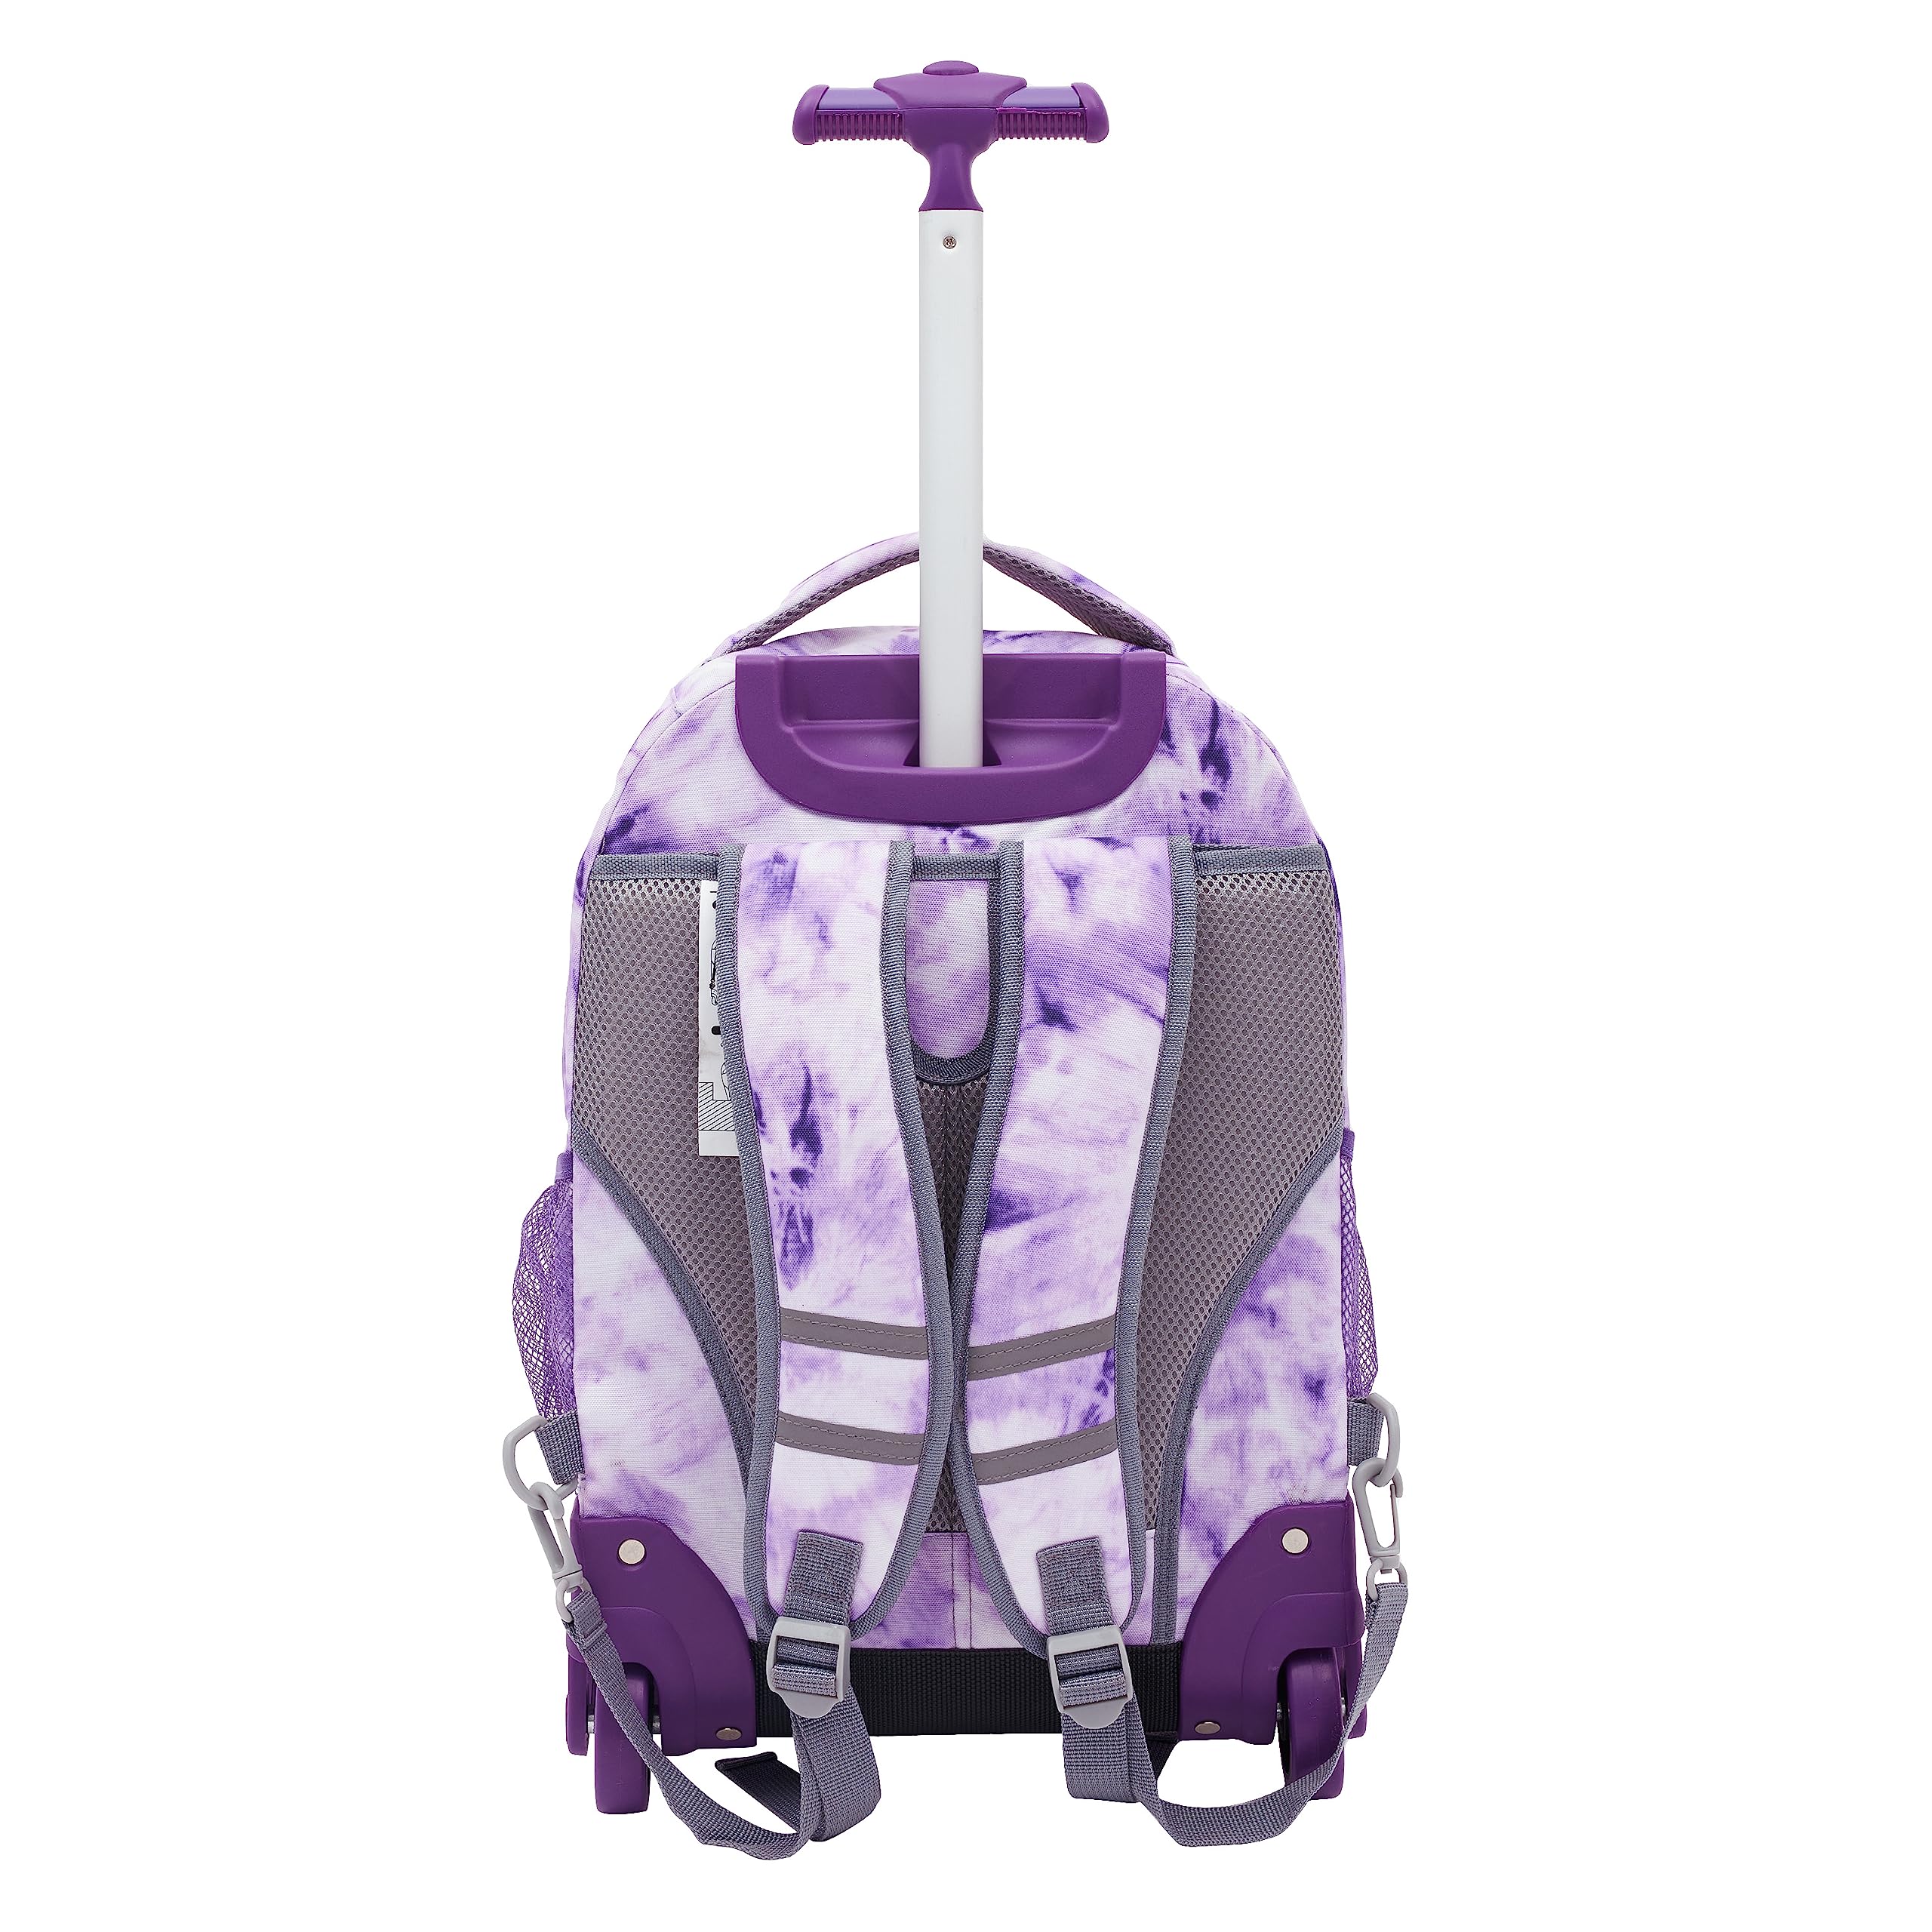 Travelers Club Rolling Backpack with Shoulder Straps, Purple Tye, 18-Inch